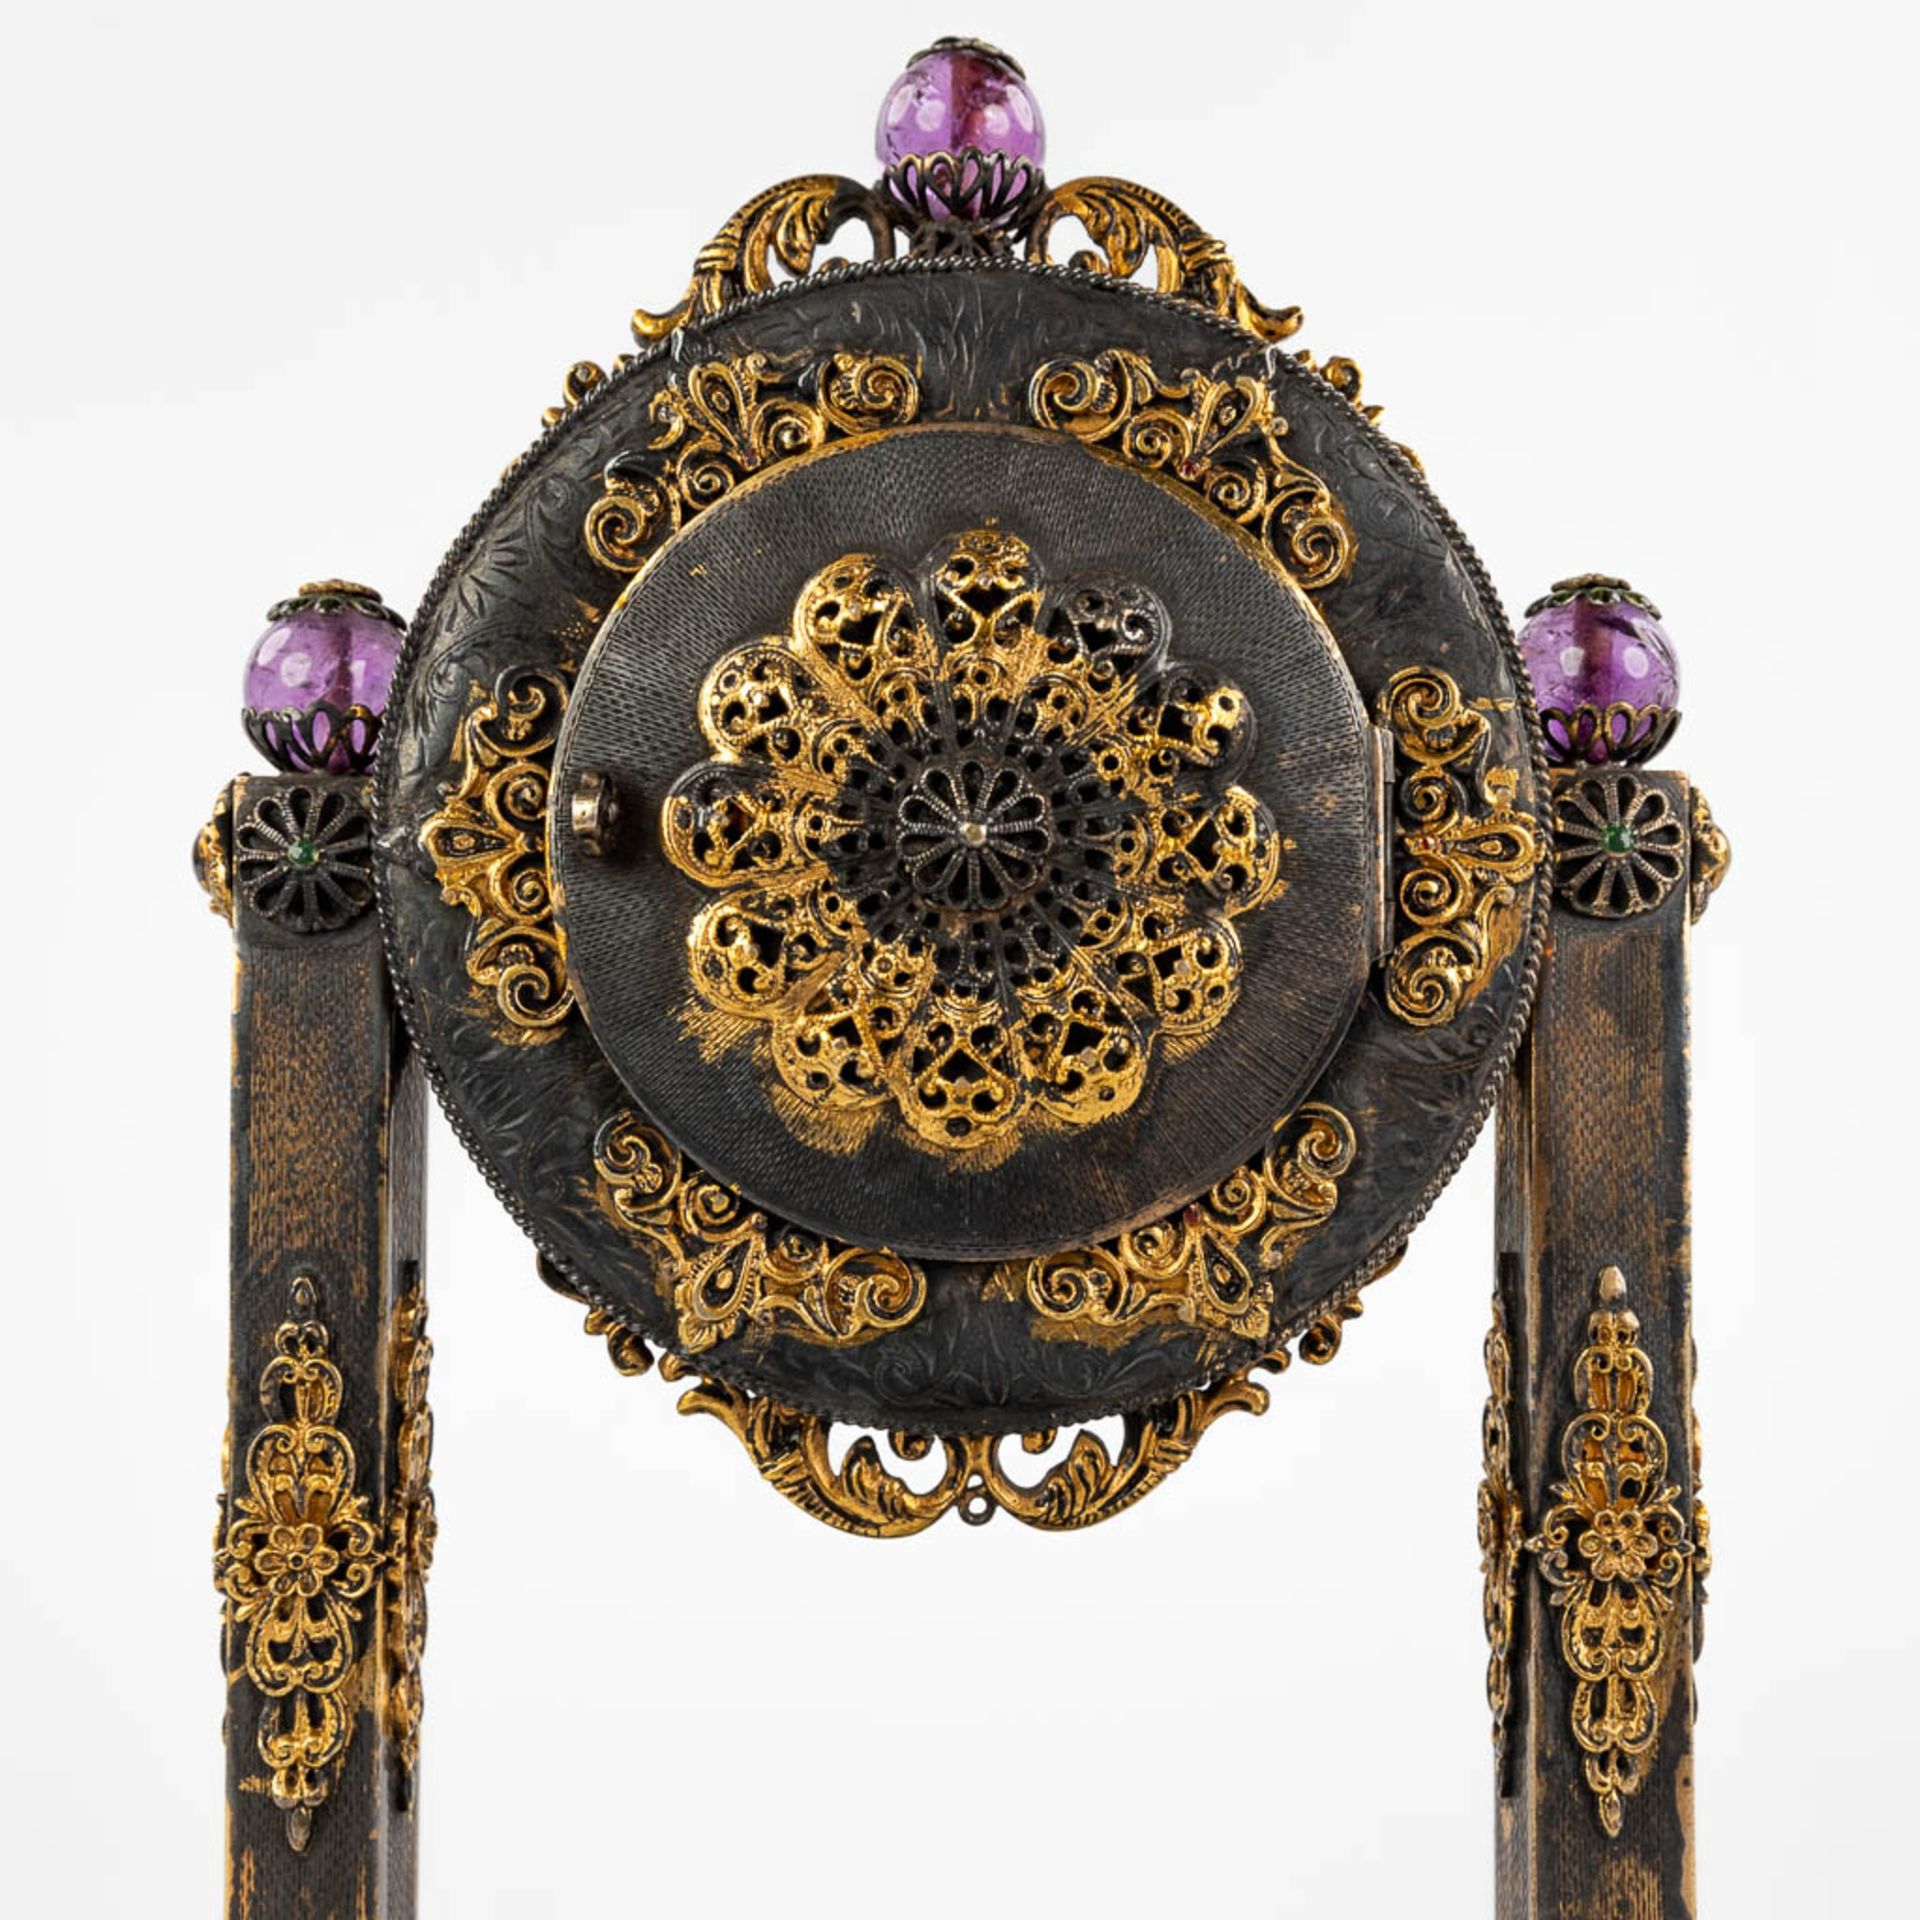 A mantle clock, silver and gold-plated metal and decorated with stone and onyx, pearls. Circa 1900. - Image 12 of 14